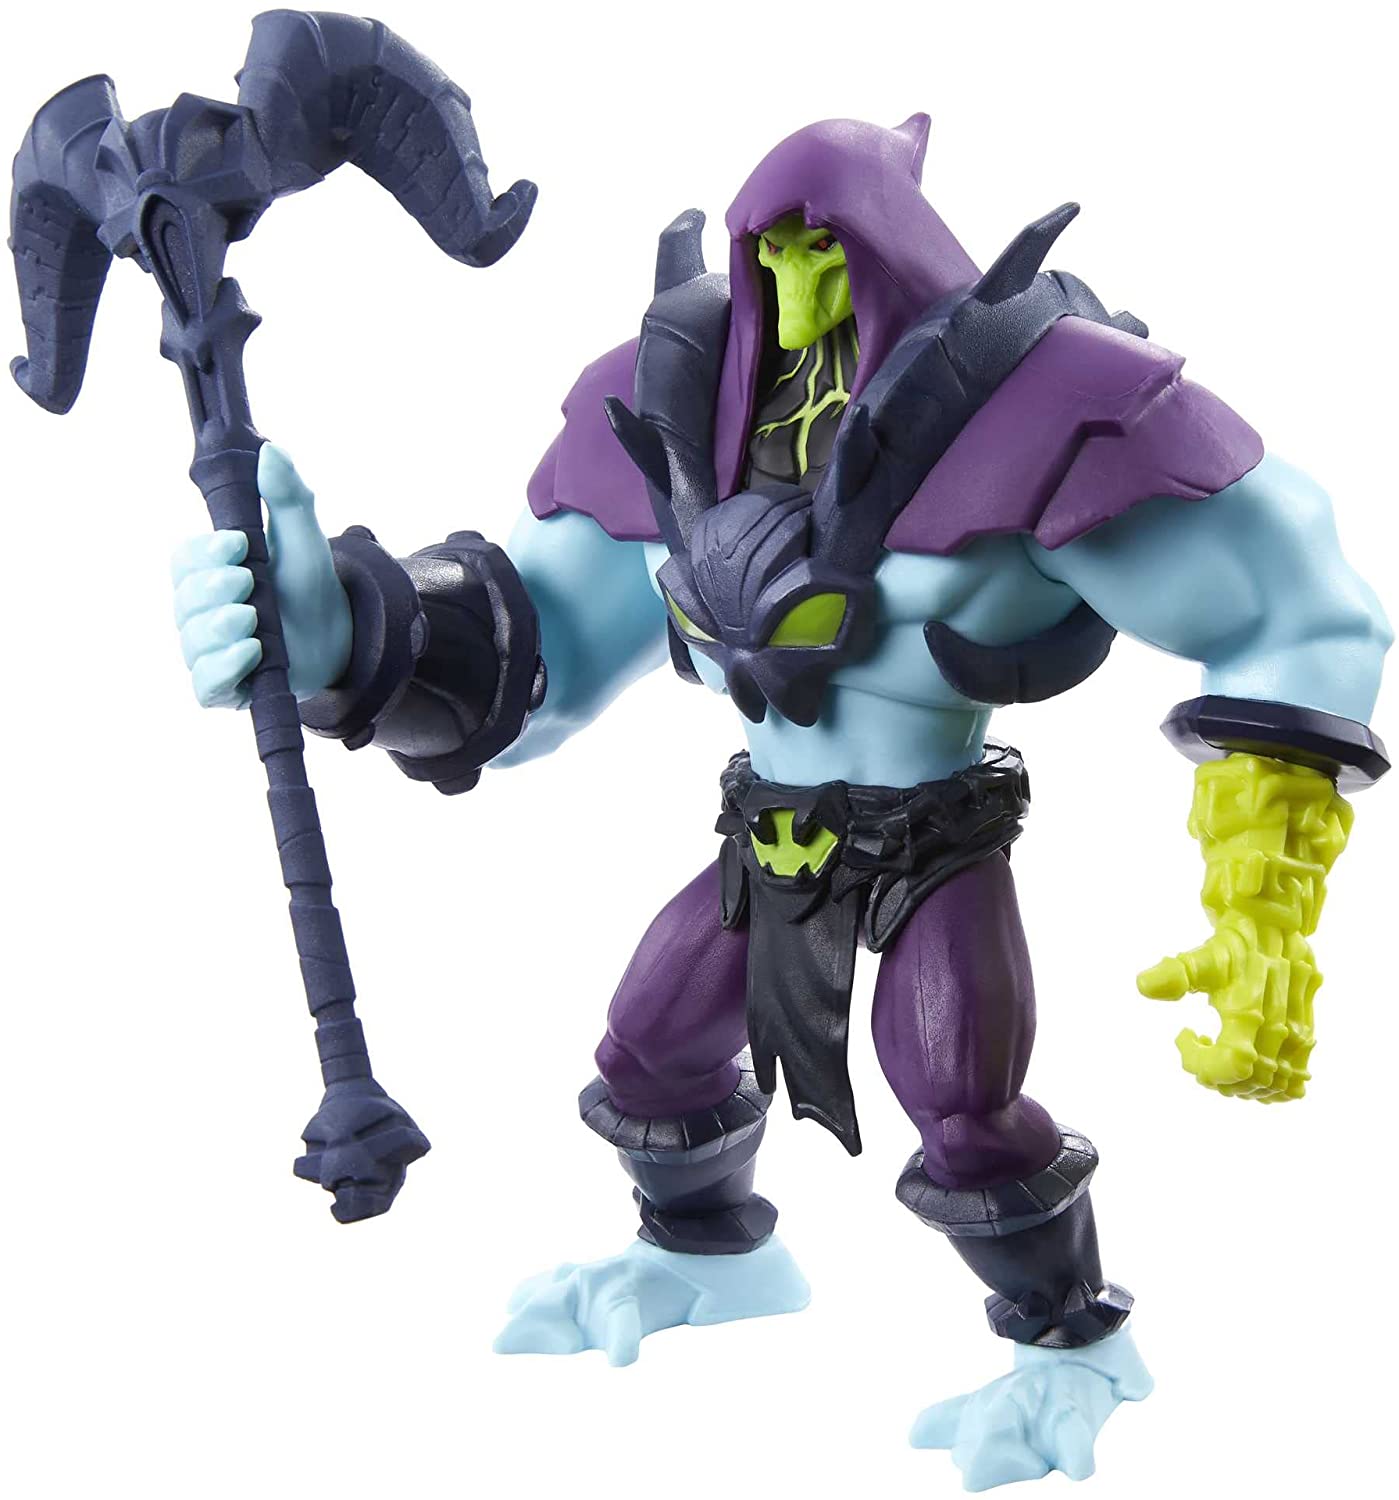 He-Man and the Masters of the Universe - Skeletor